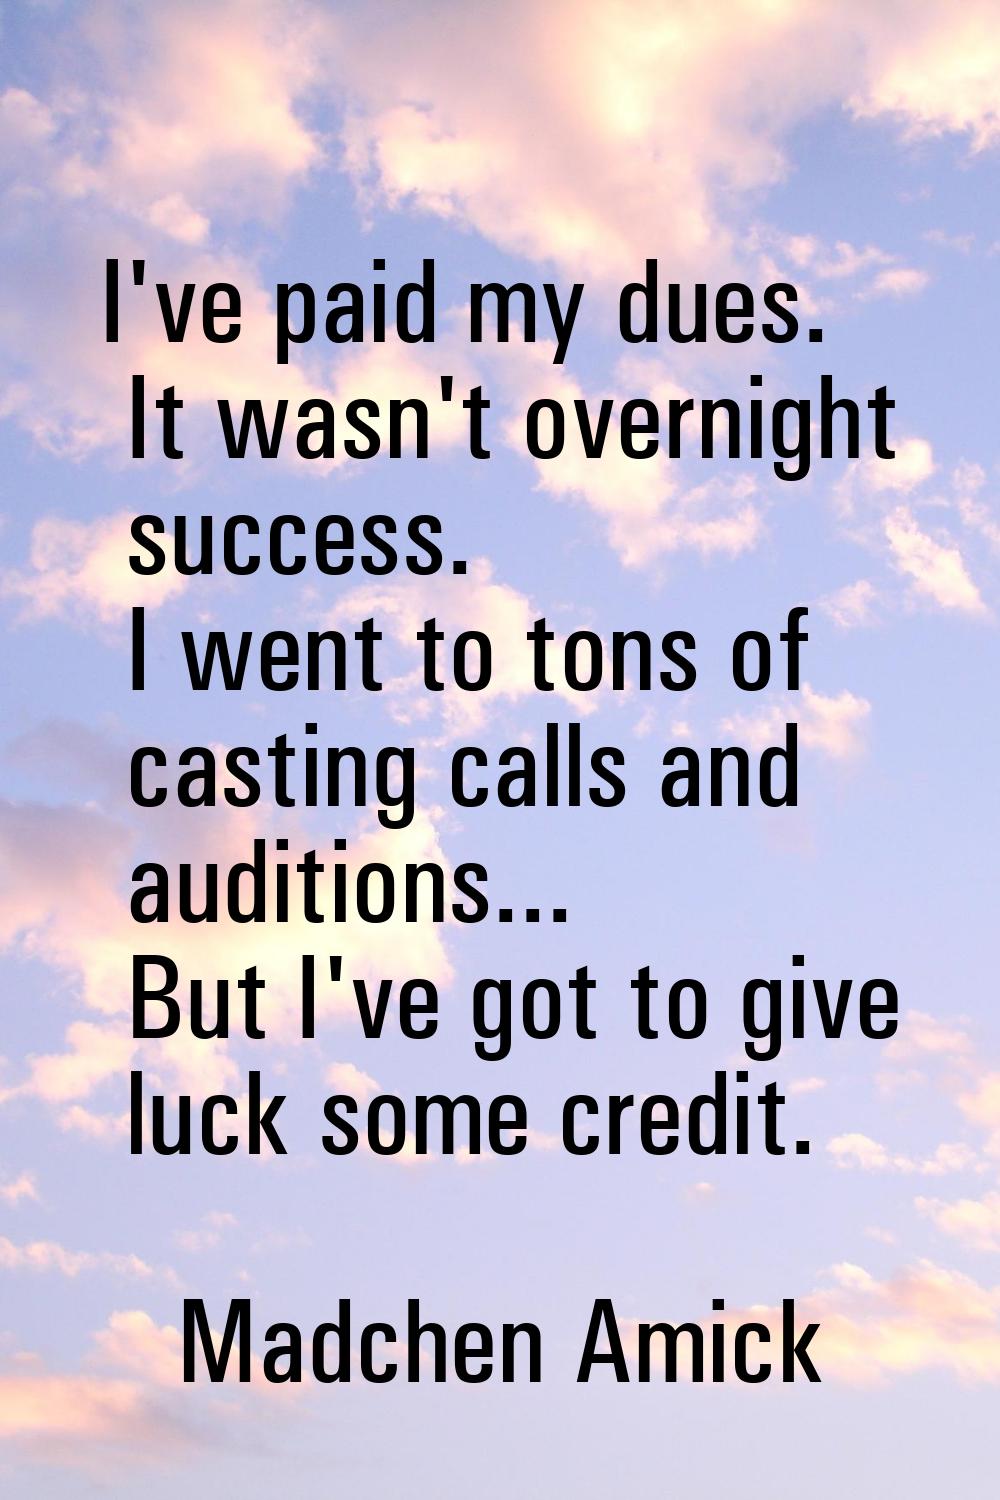 I've paid my dues. It wasn't overnight success. I went to tons of casting calls and auditions... Bu